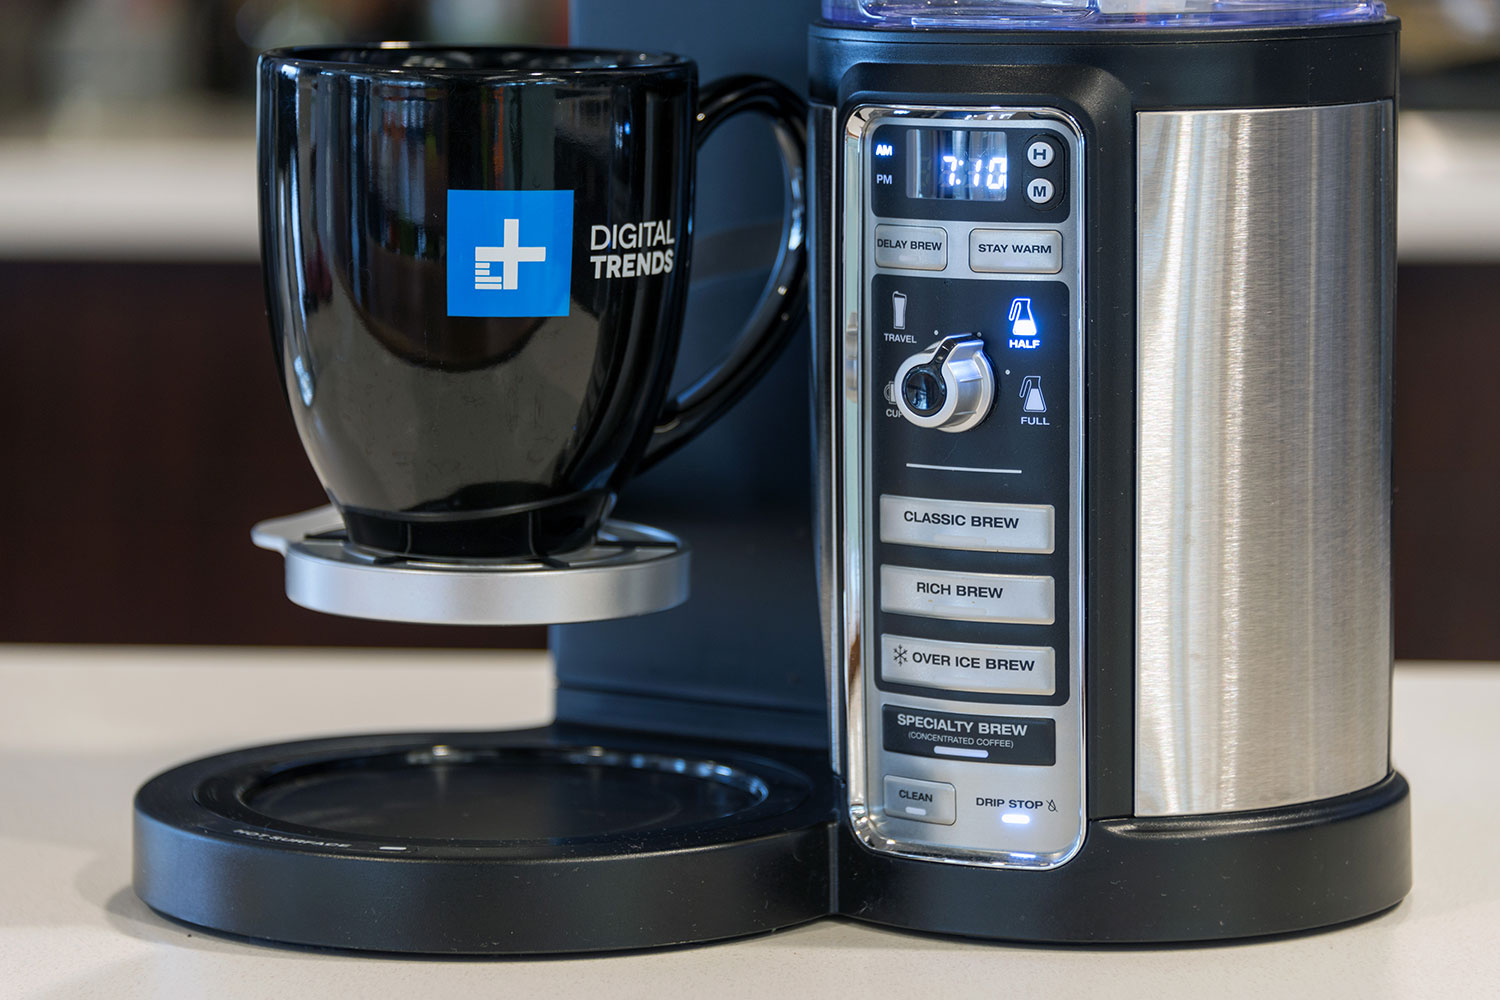 Hamilton Beach The Scoop Single Serve Coffee Maker Unboxing, Use, and  Review. 